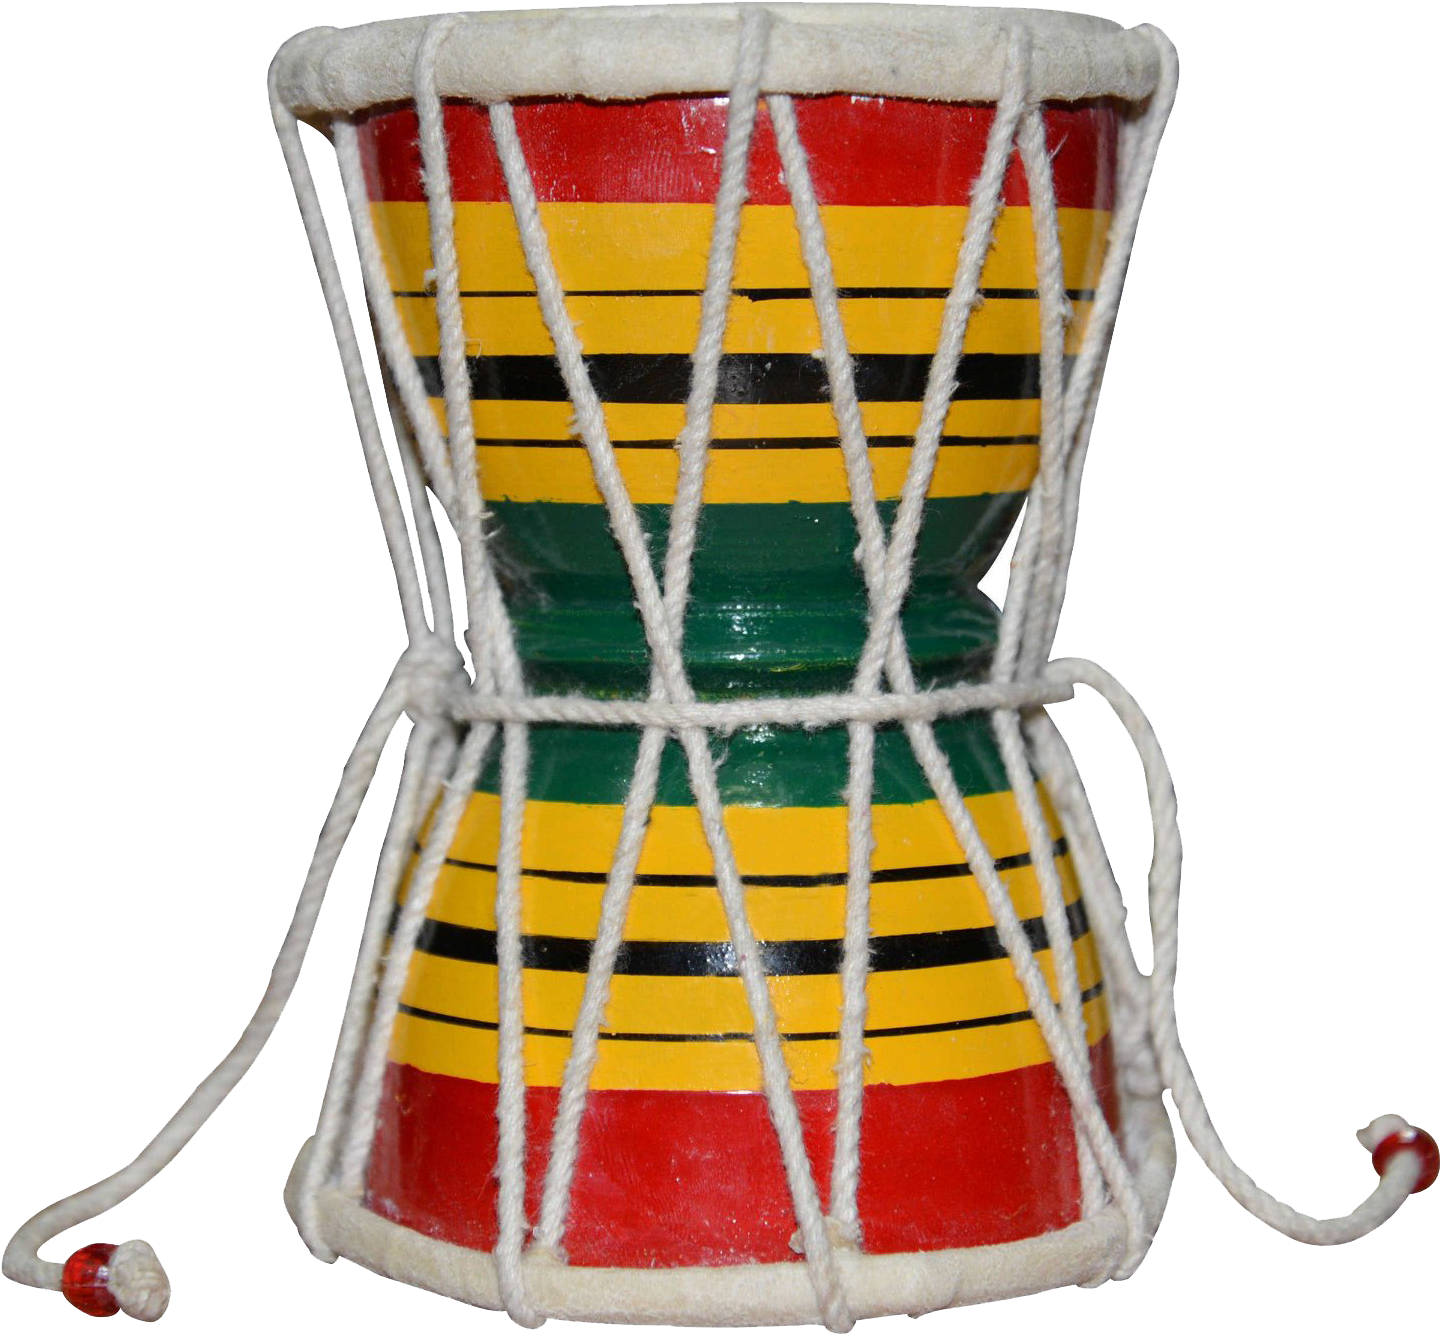 A Drum With White Ropes